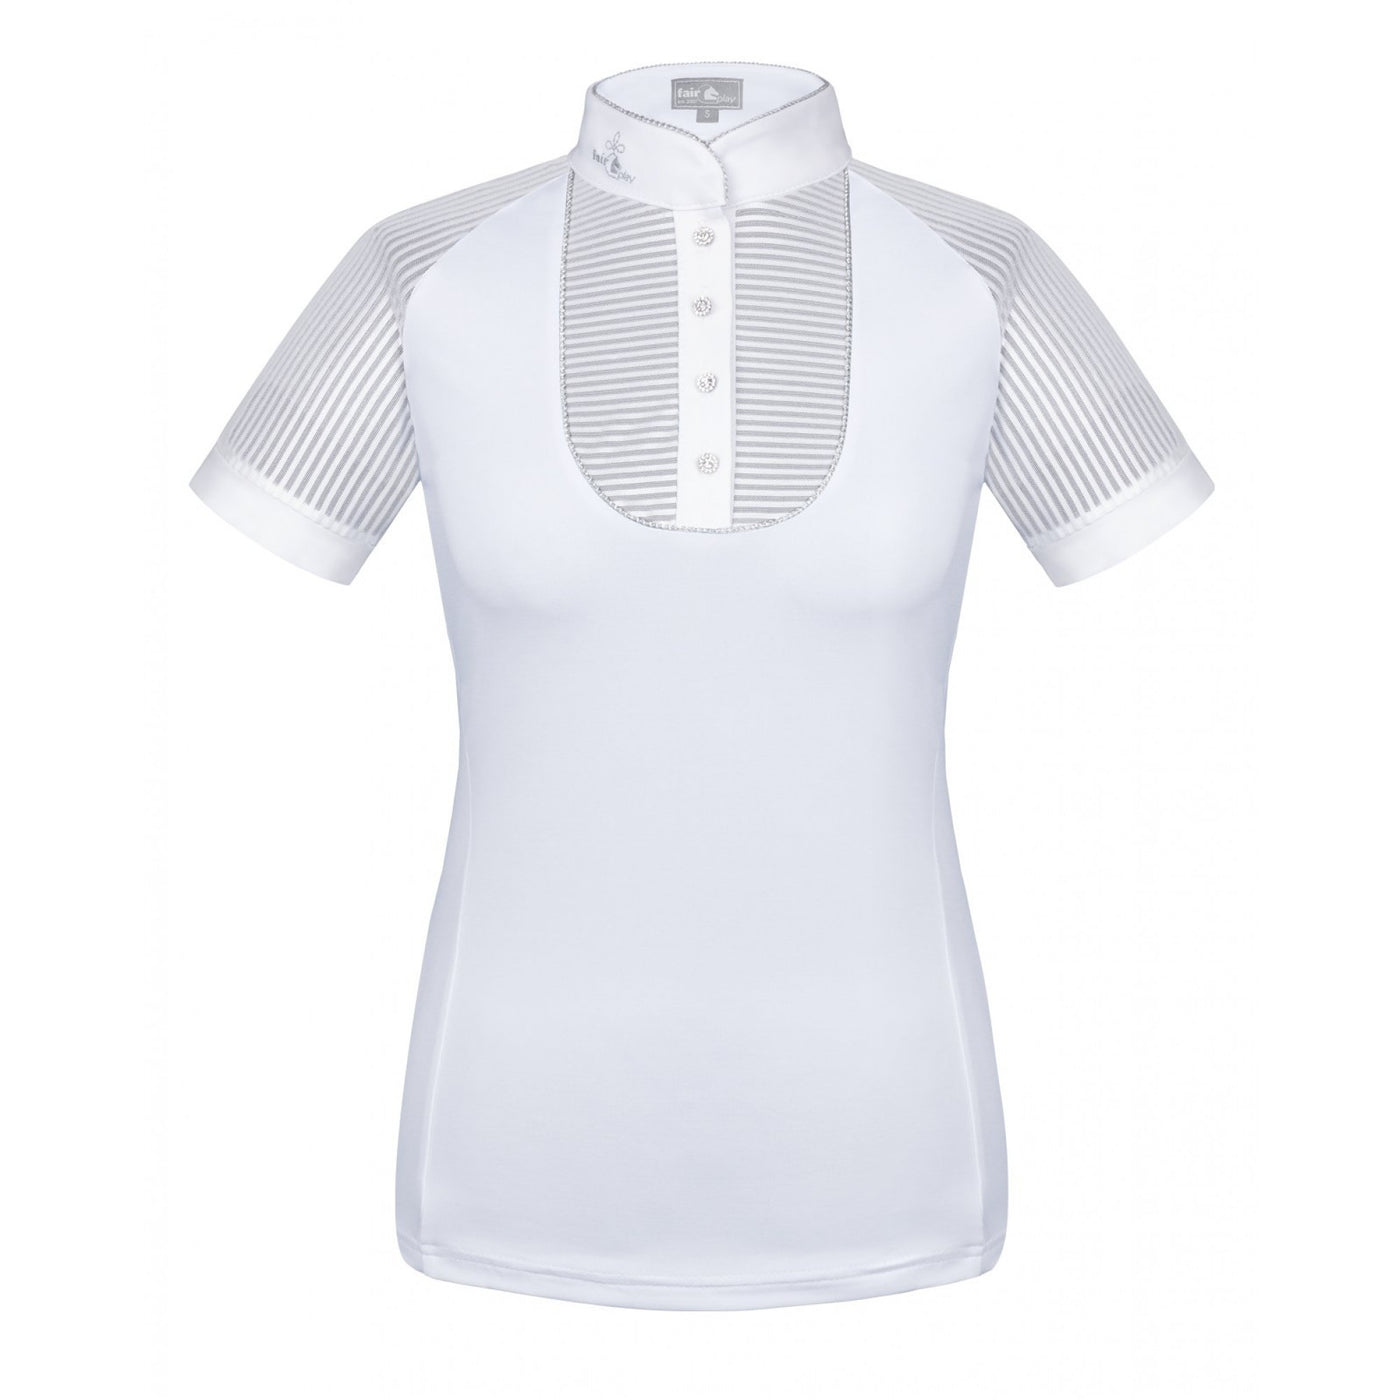 FAIR PLAY JUSTINE COMPETITION SHORT SLEEVE SHOW SHIRT